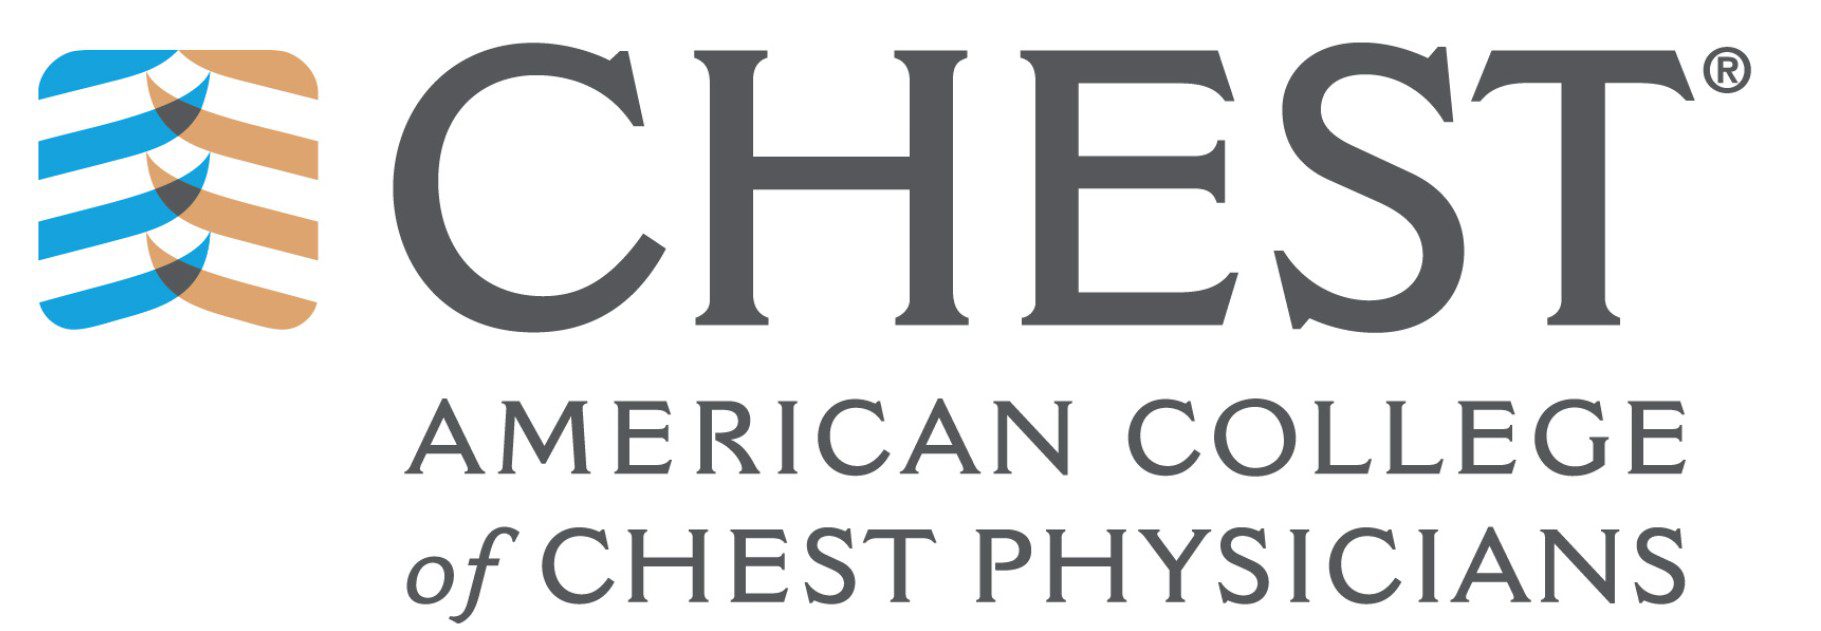 American College of Chest Physicians CHEST 2020 Recorded Content Free Download